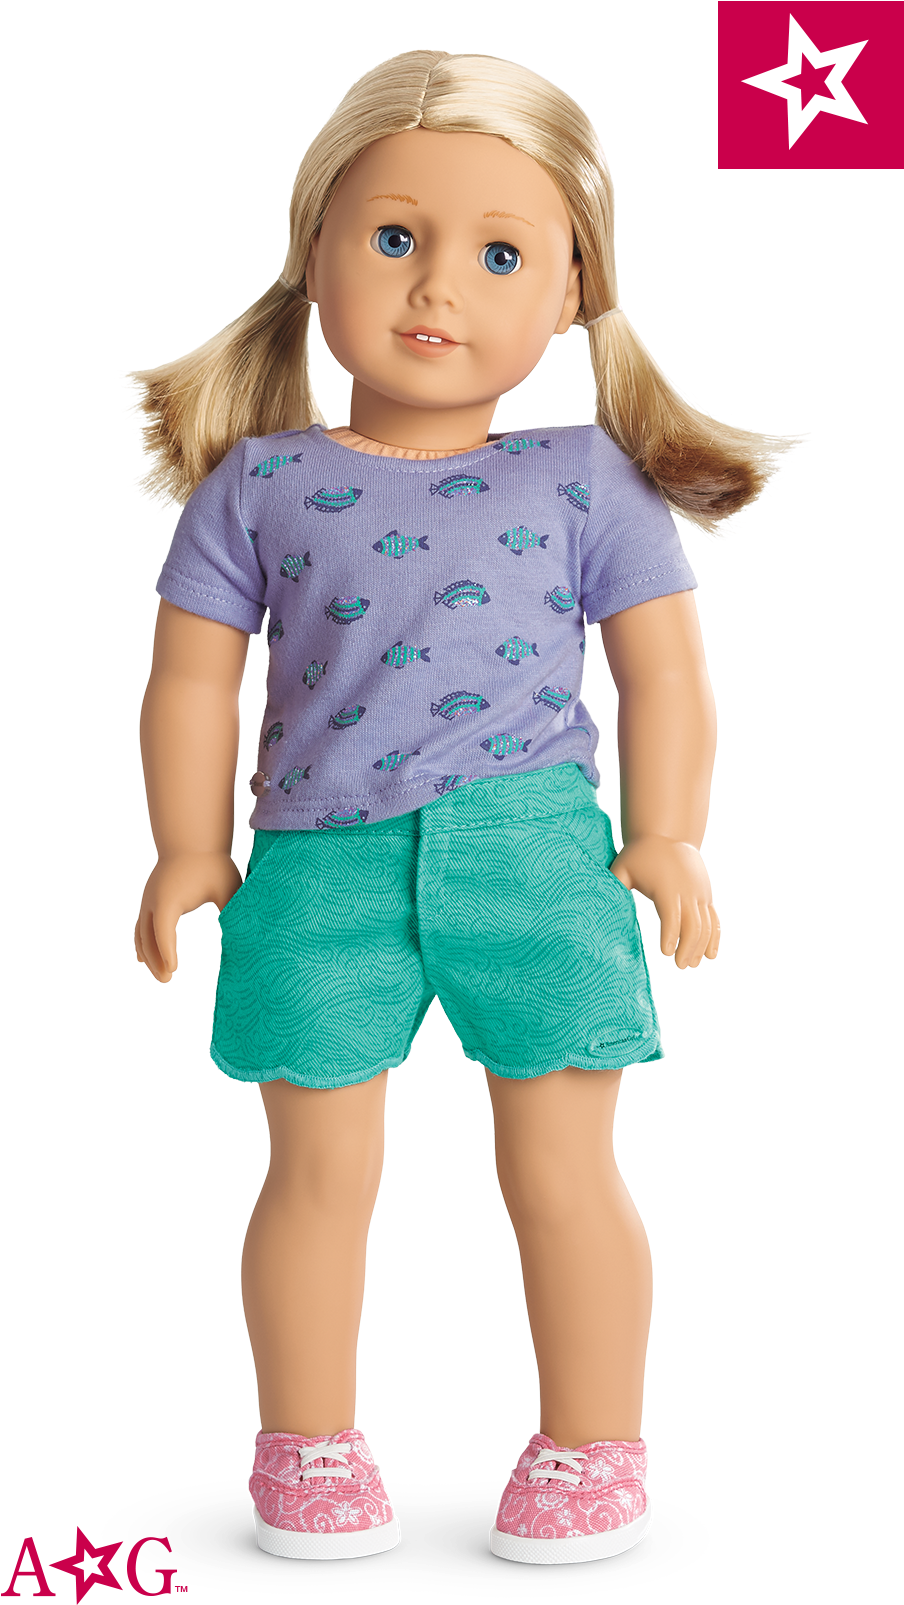 Girl Doll Clothes - American Girl Truly Me 69 (961x1616)